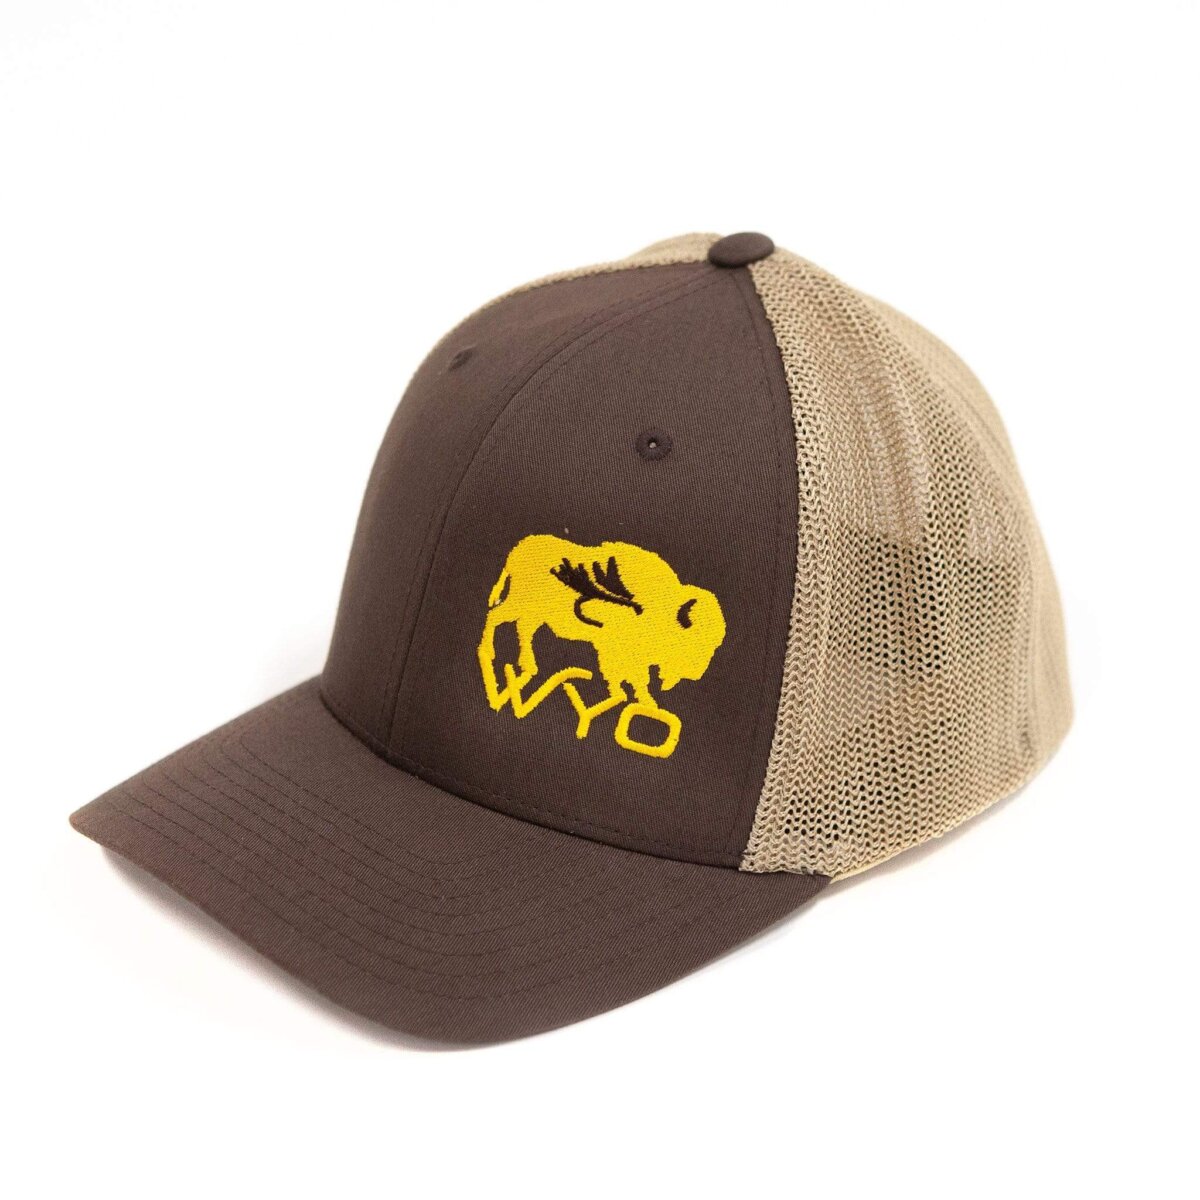 Wyoming Gold Wyo - Bison - Brown Mesh Flex-Fit Hat Fly and Shop